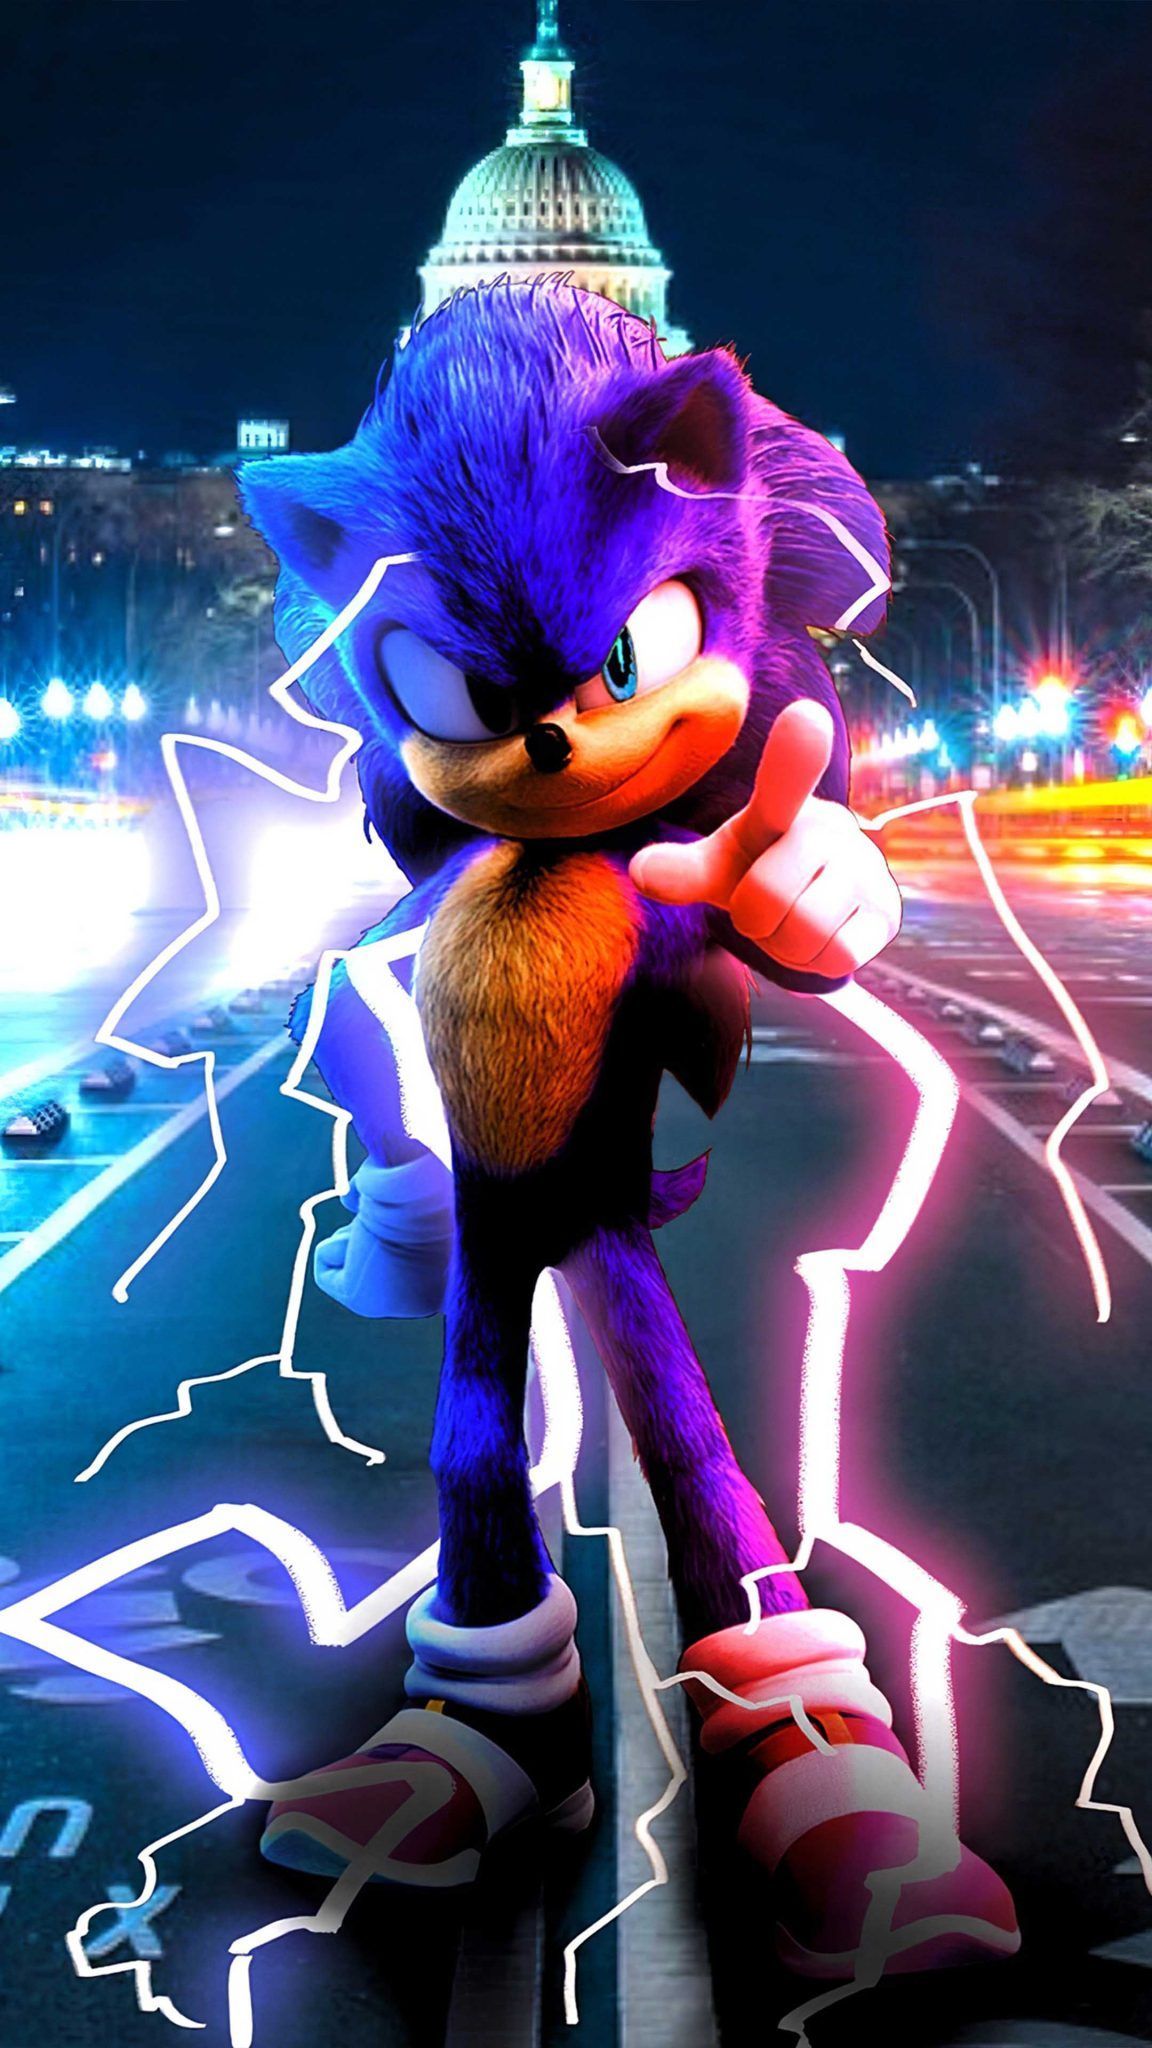 Sonic The Hedgehog Poster 2020 in 2020